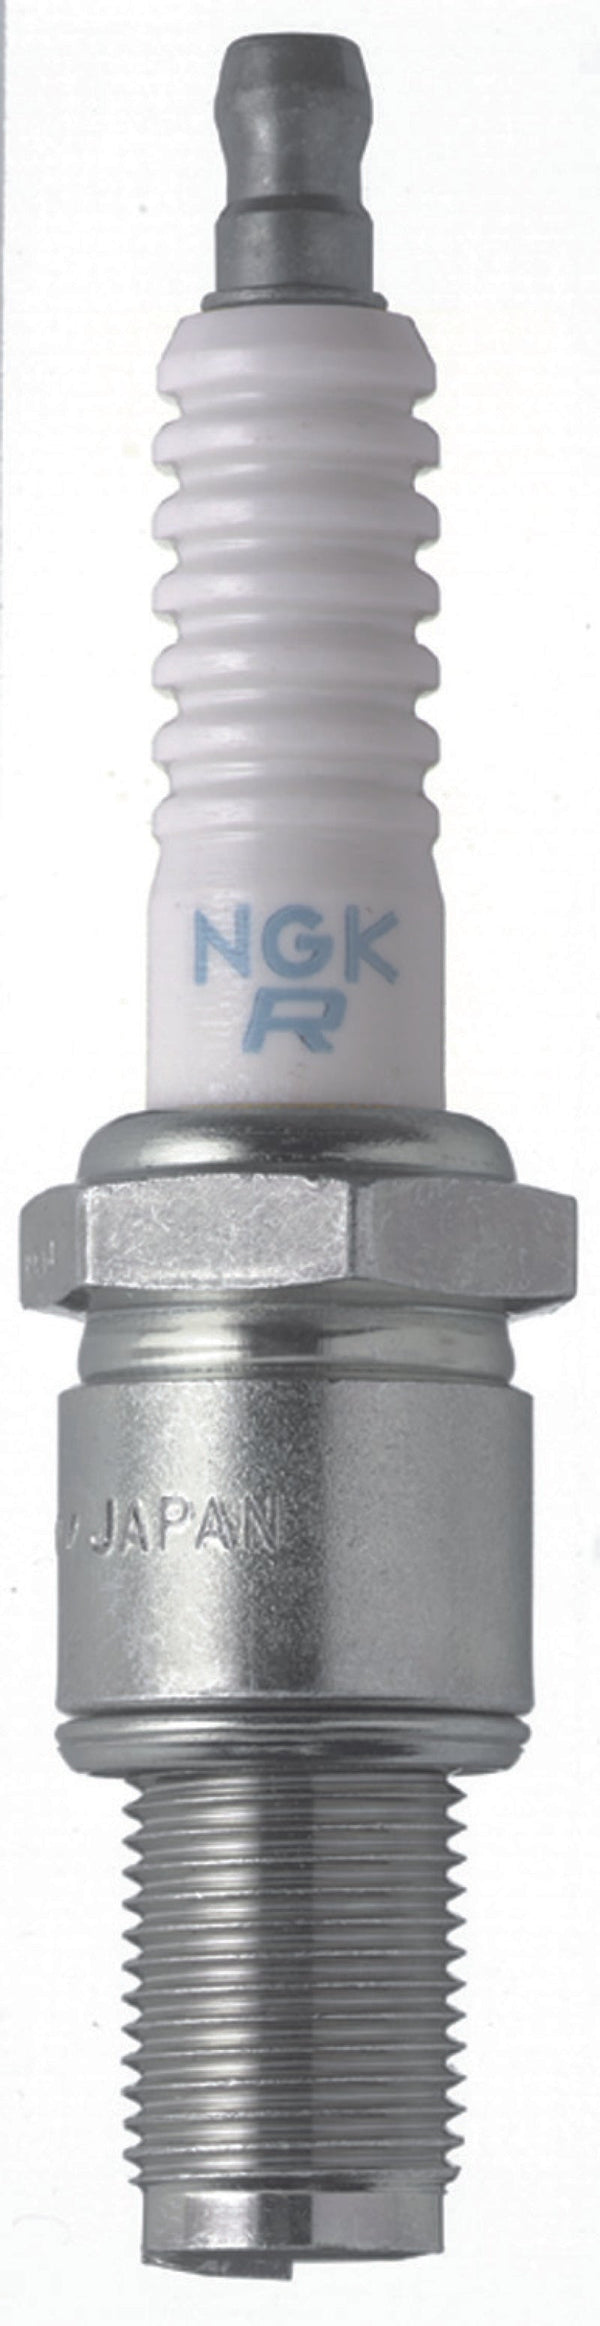 NGK Racing .5 Spark Plug Box of 4 (R6725-105) - Premium Spark Plugs from NGK - Just 643.48 SR! Shop now at Motors